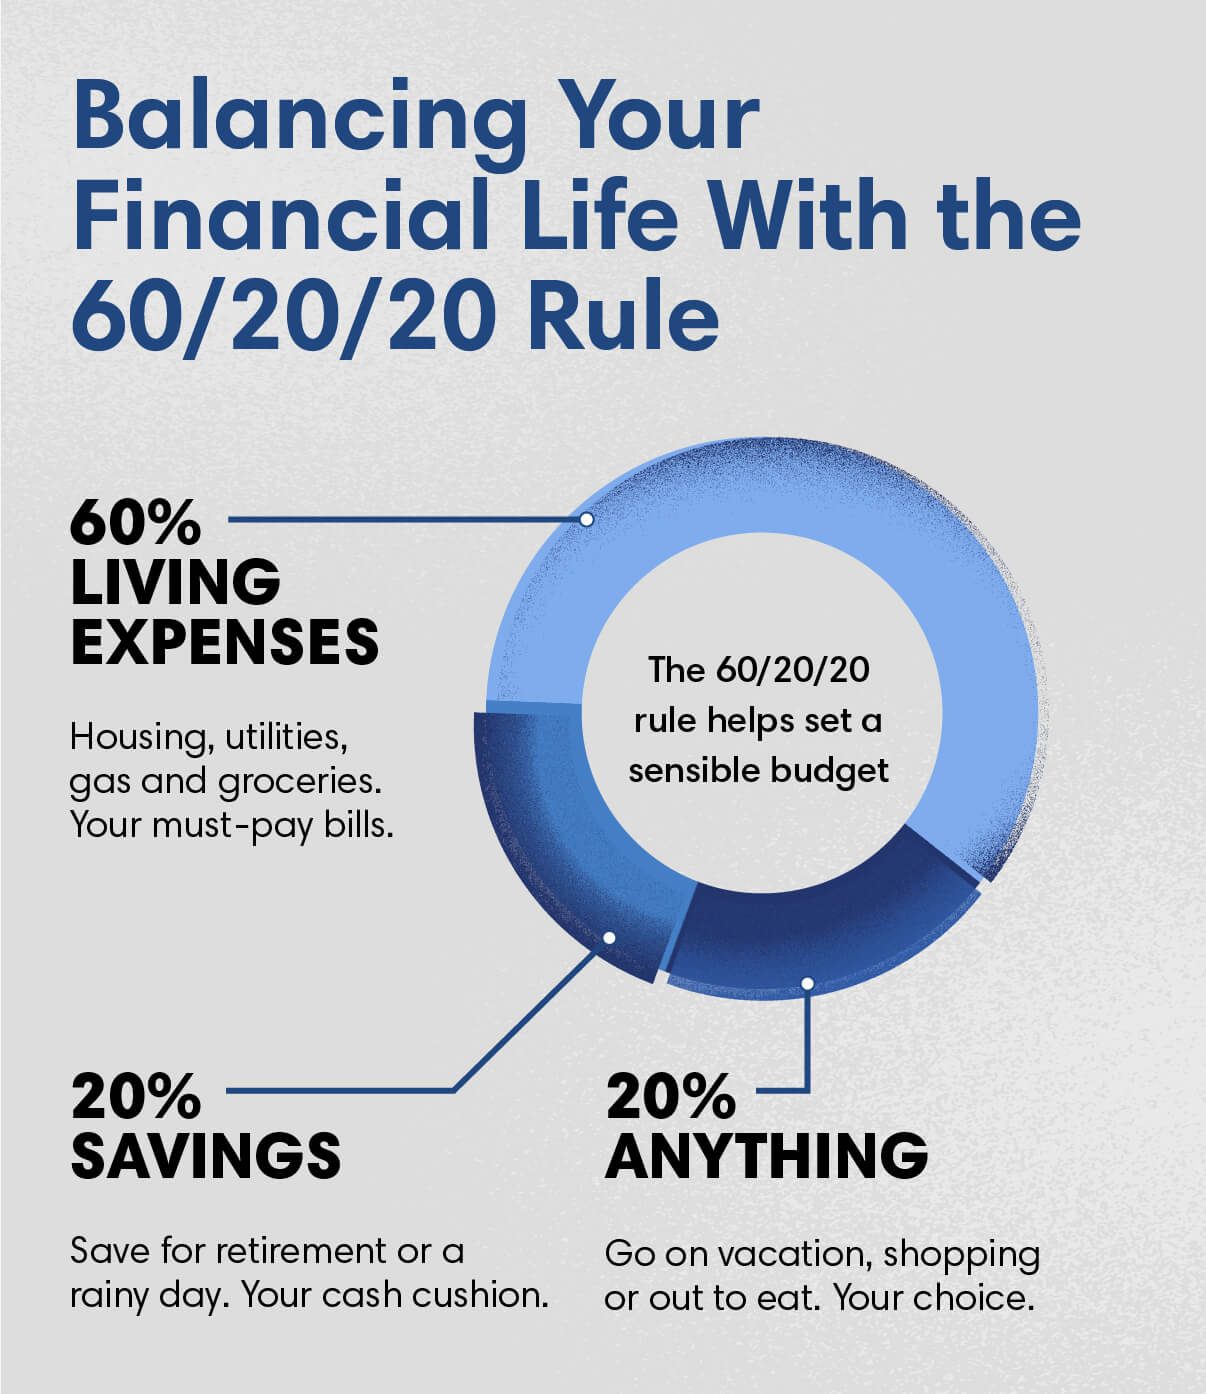 Balancing Your Financial Life With the 60/20/20 Rule First Citizens Bank